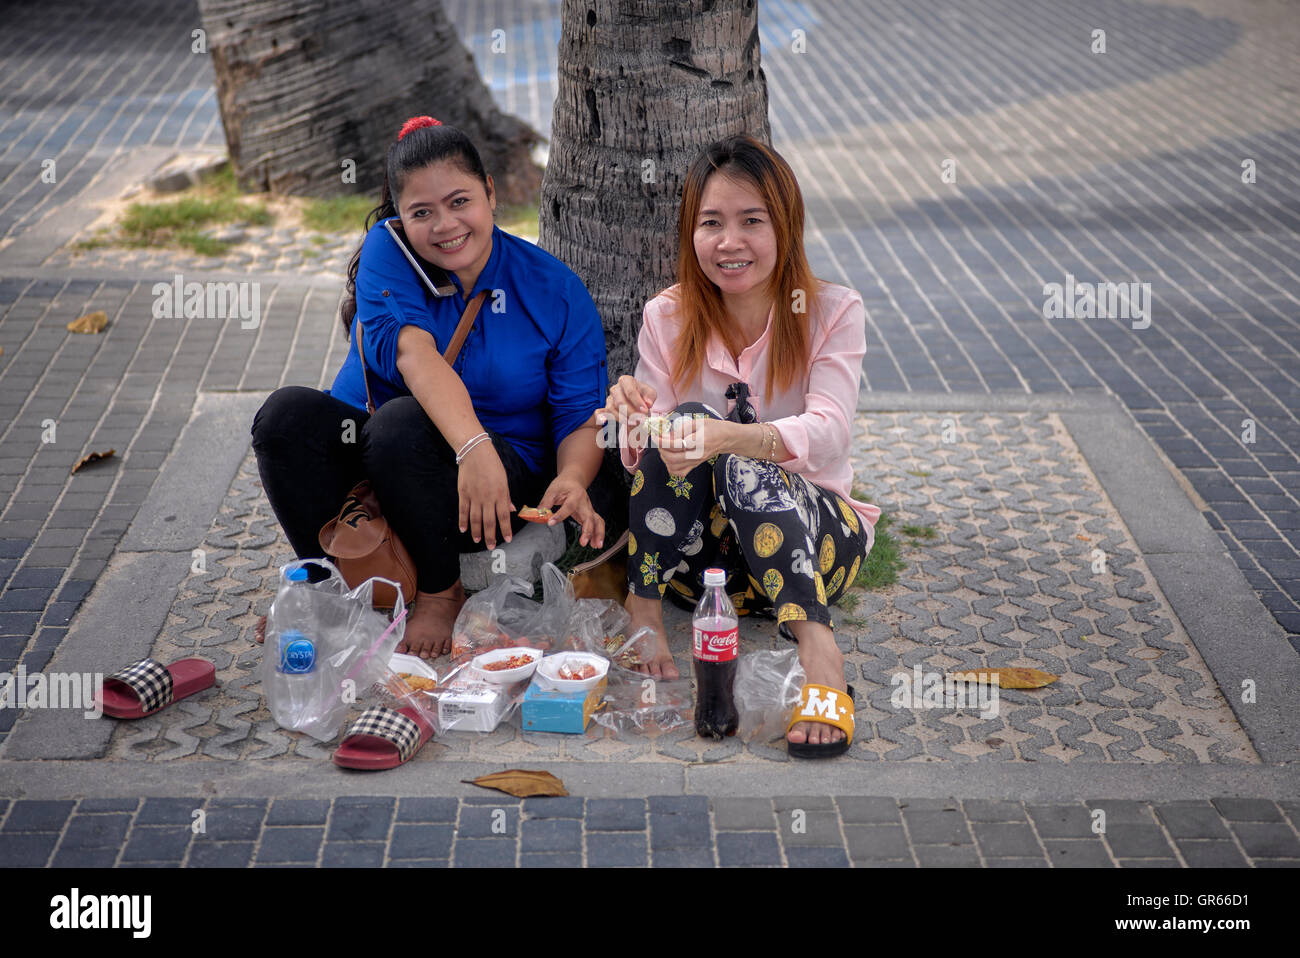 Thailand people eating on the street. Thailand S. E. Asia Stock Photo